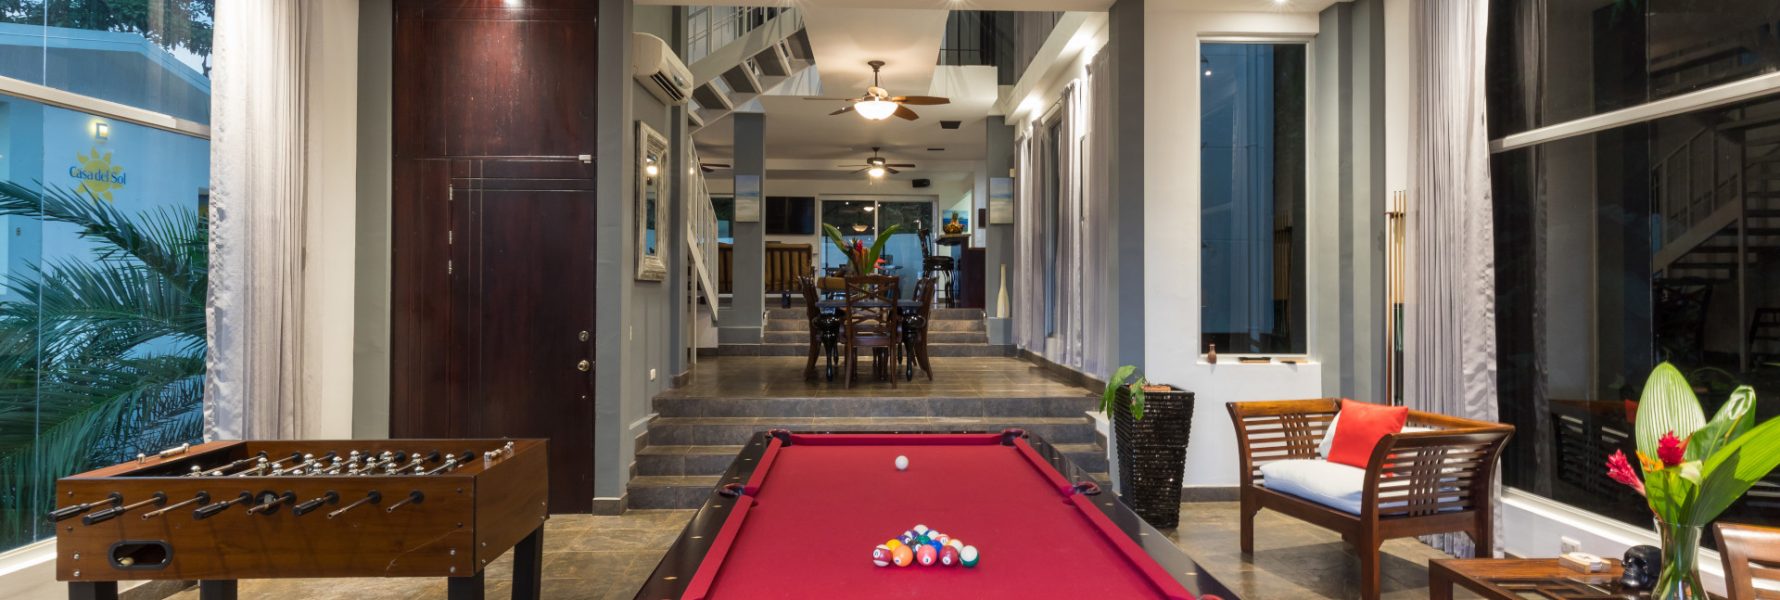 The game room features comfy seating, pool table, foosball table and breathtaking view of the rest of the house.